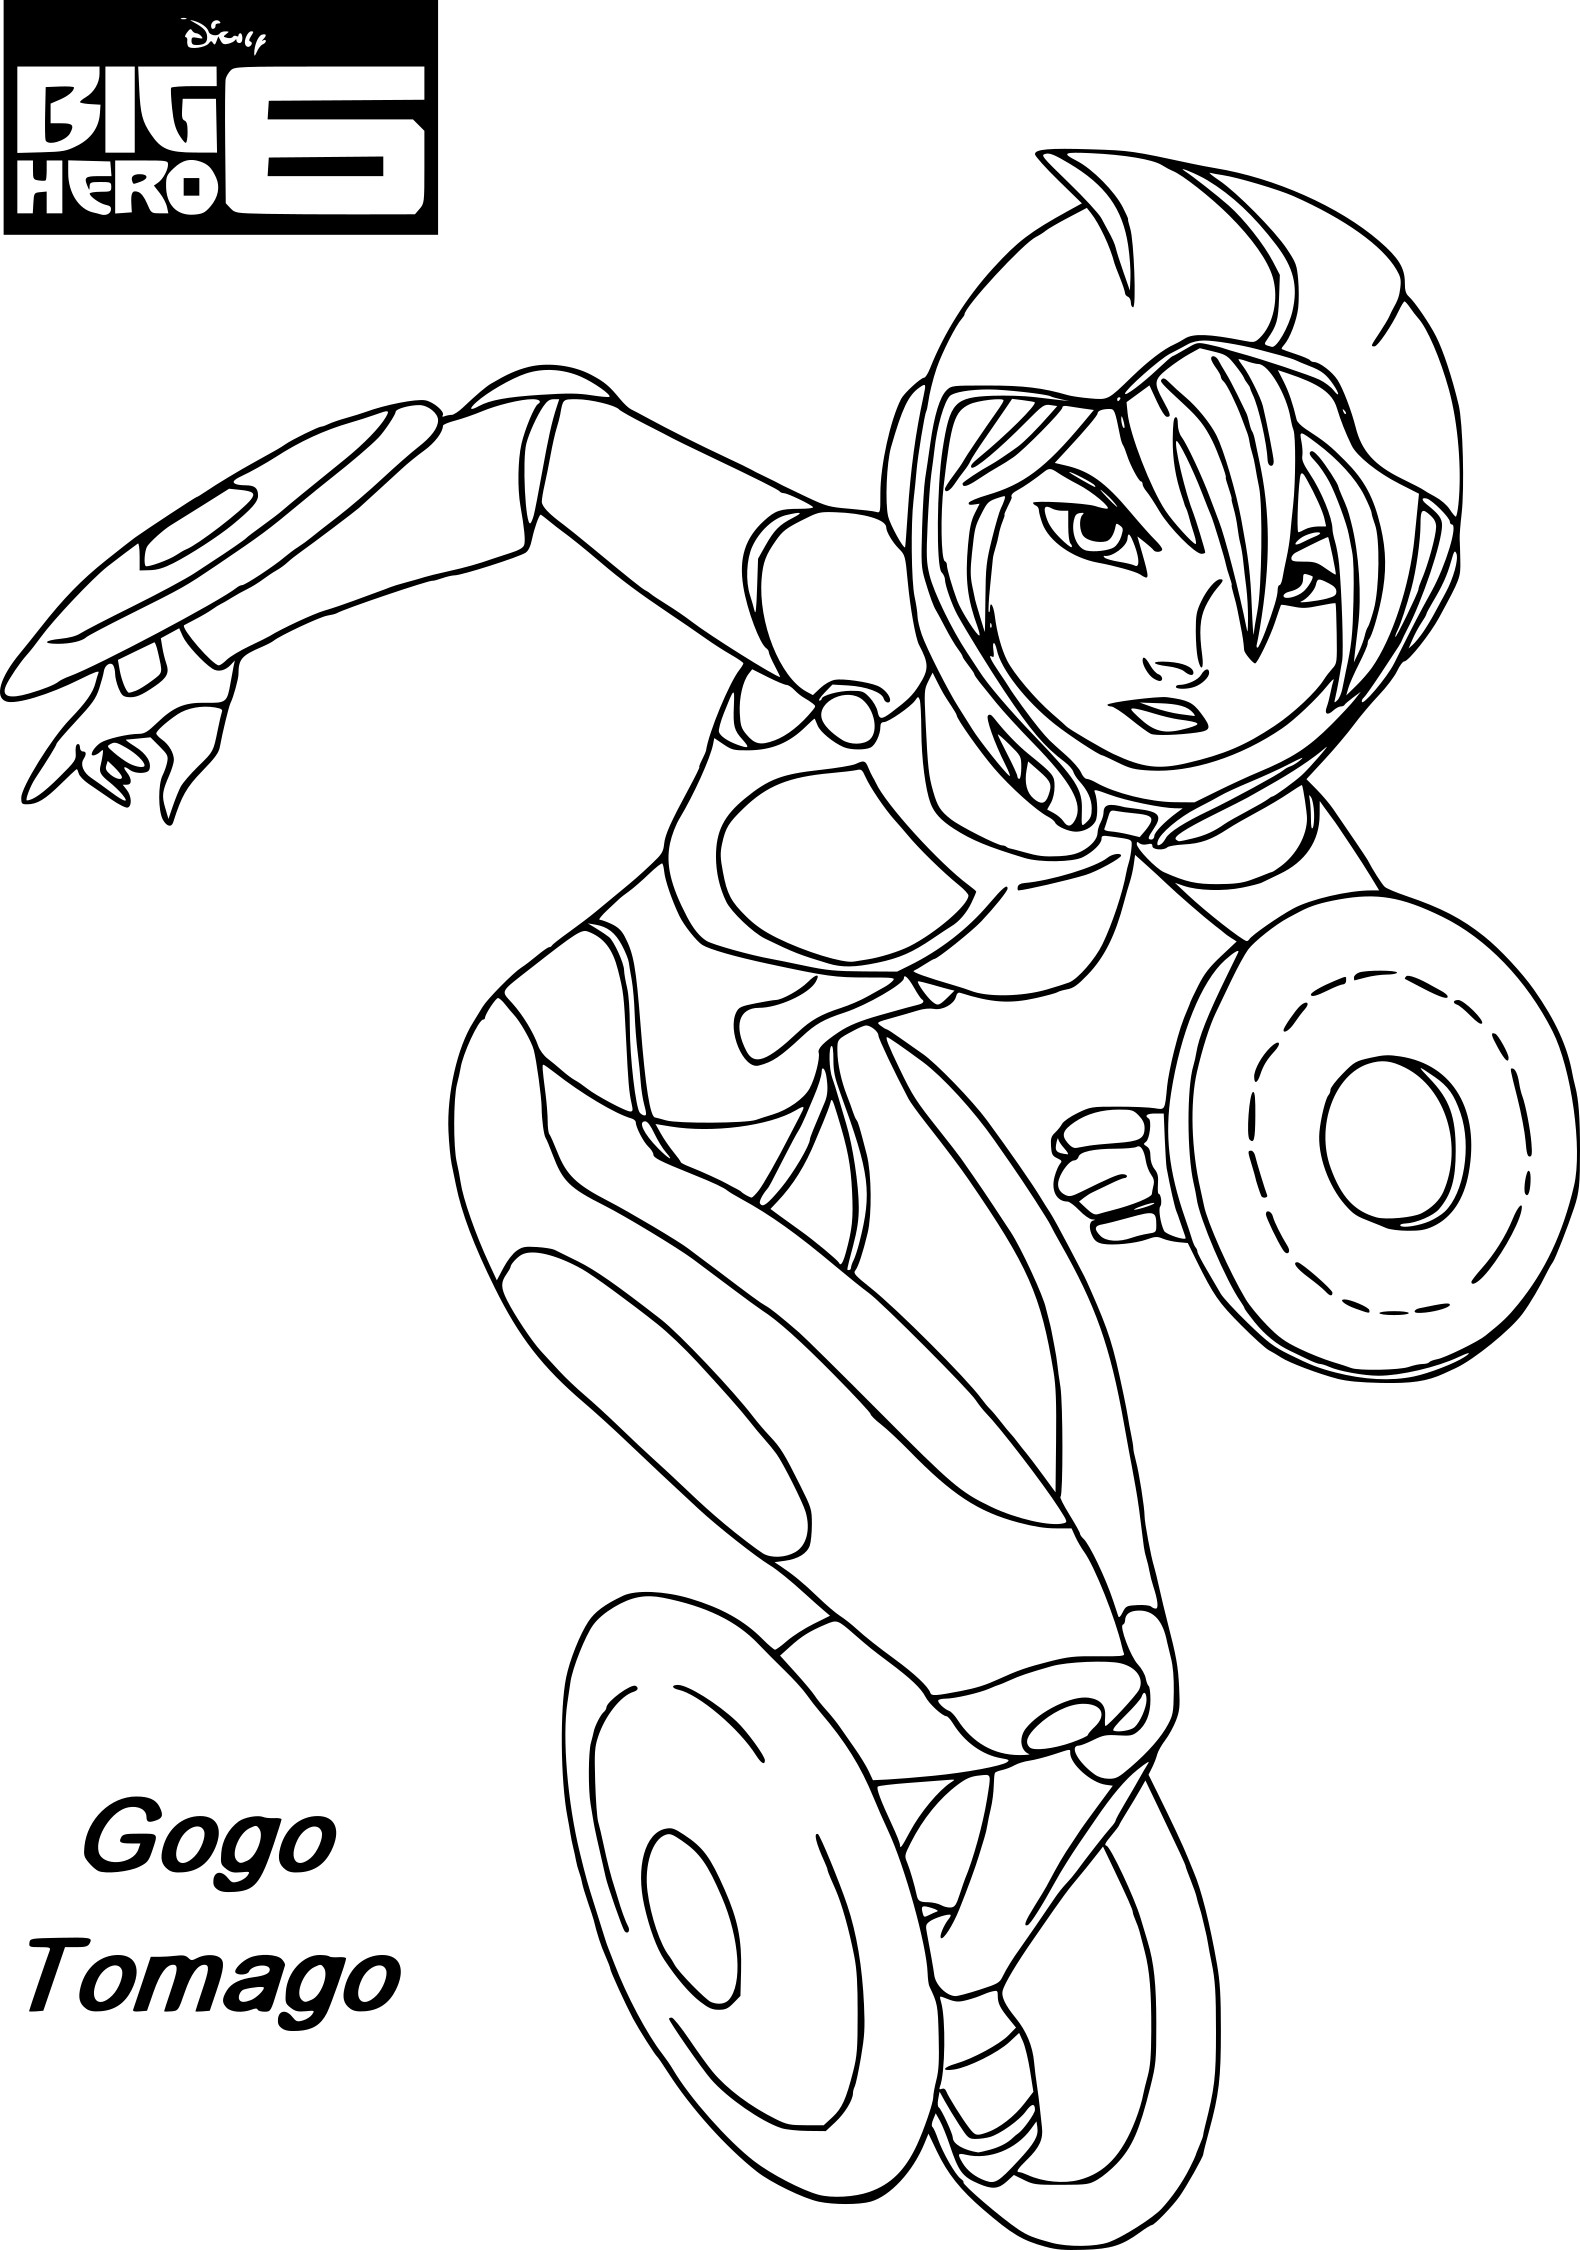 Gogo Tomago The New Heroes coloring page